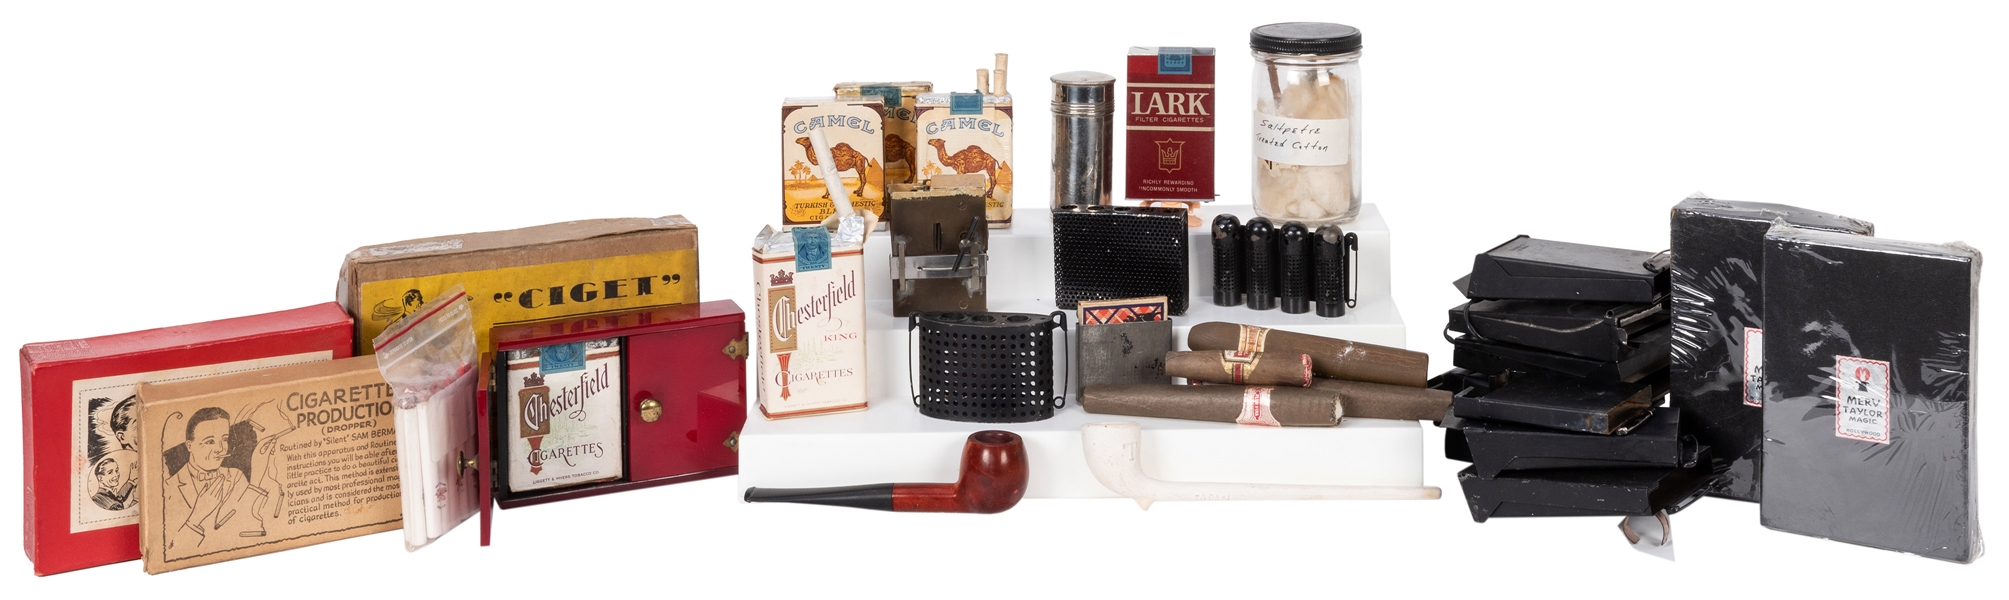 Cigarette Magic. Collection of Props, Gimmicks, and Magic Devices.